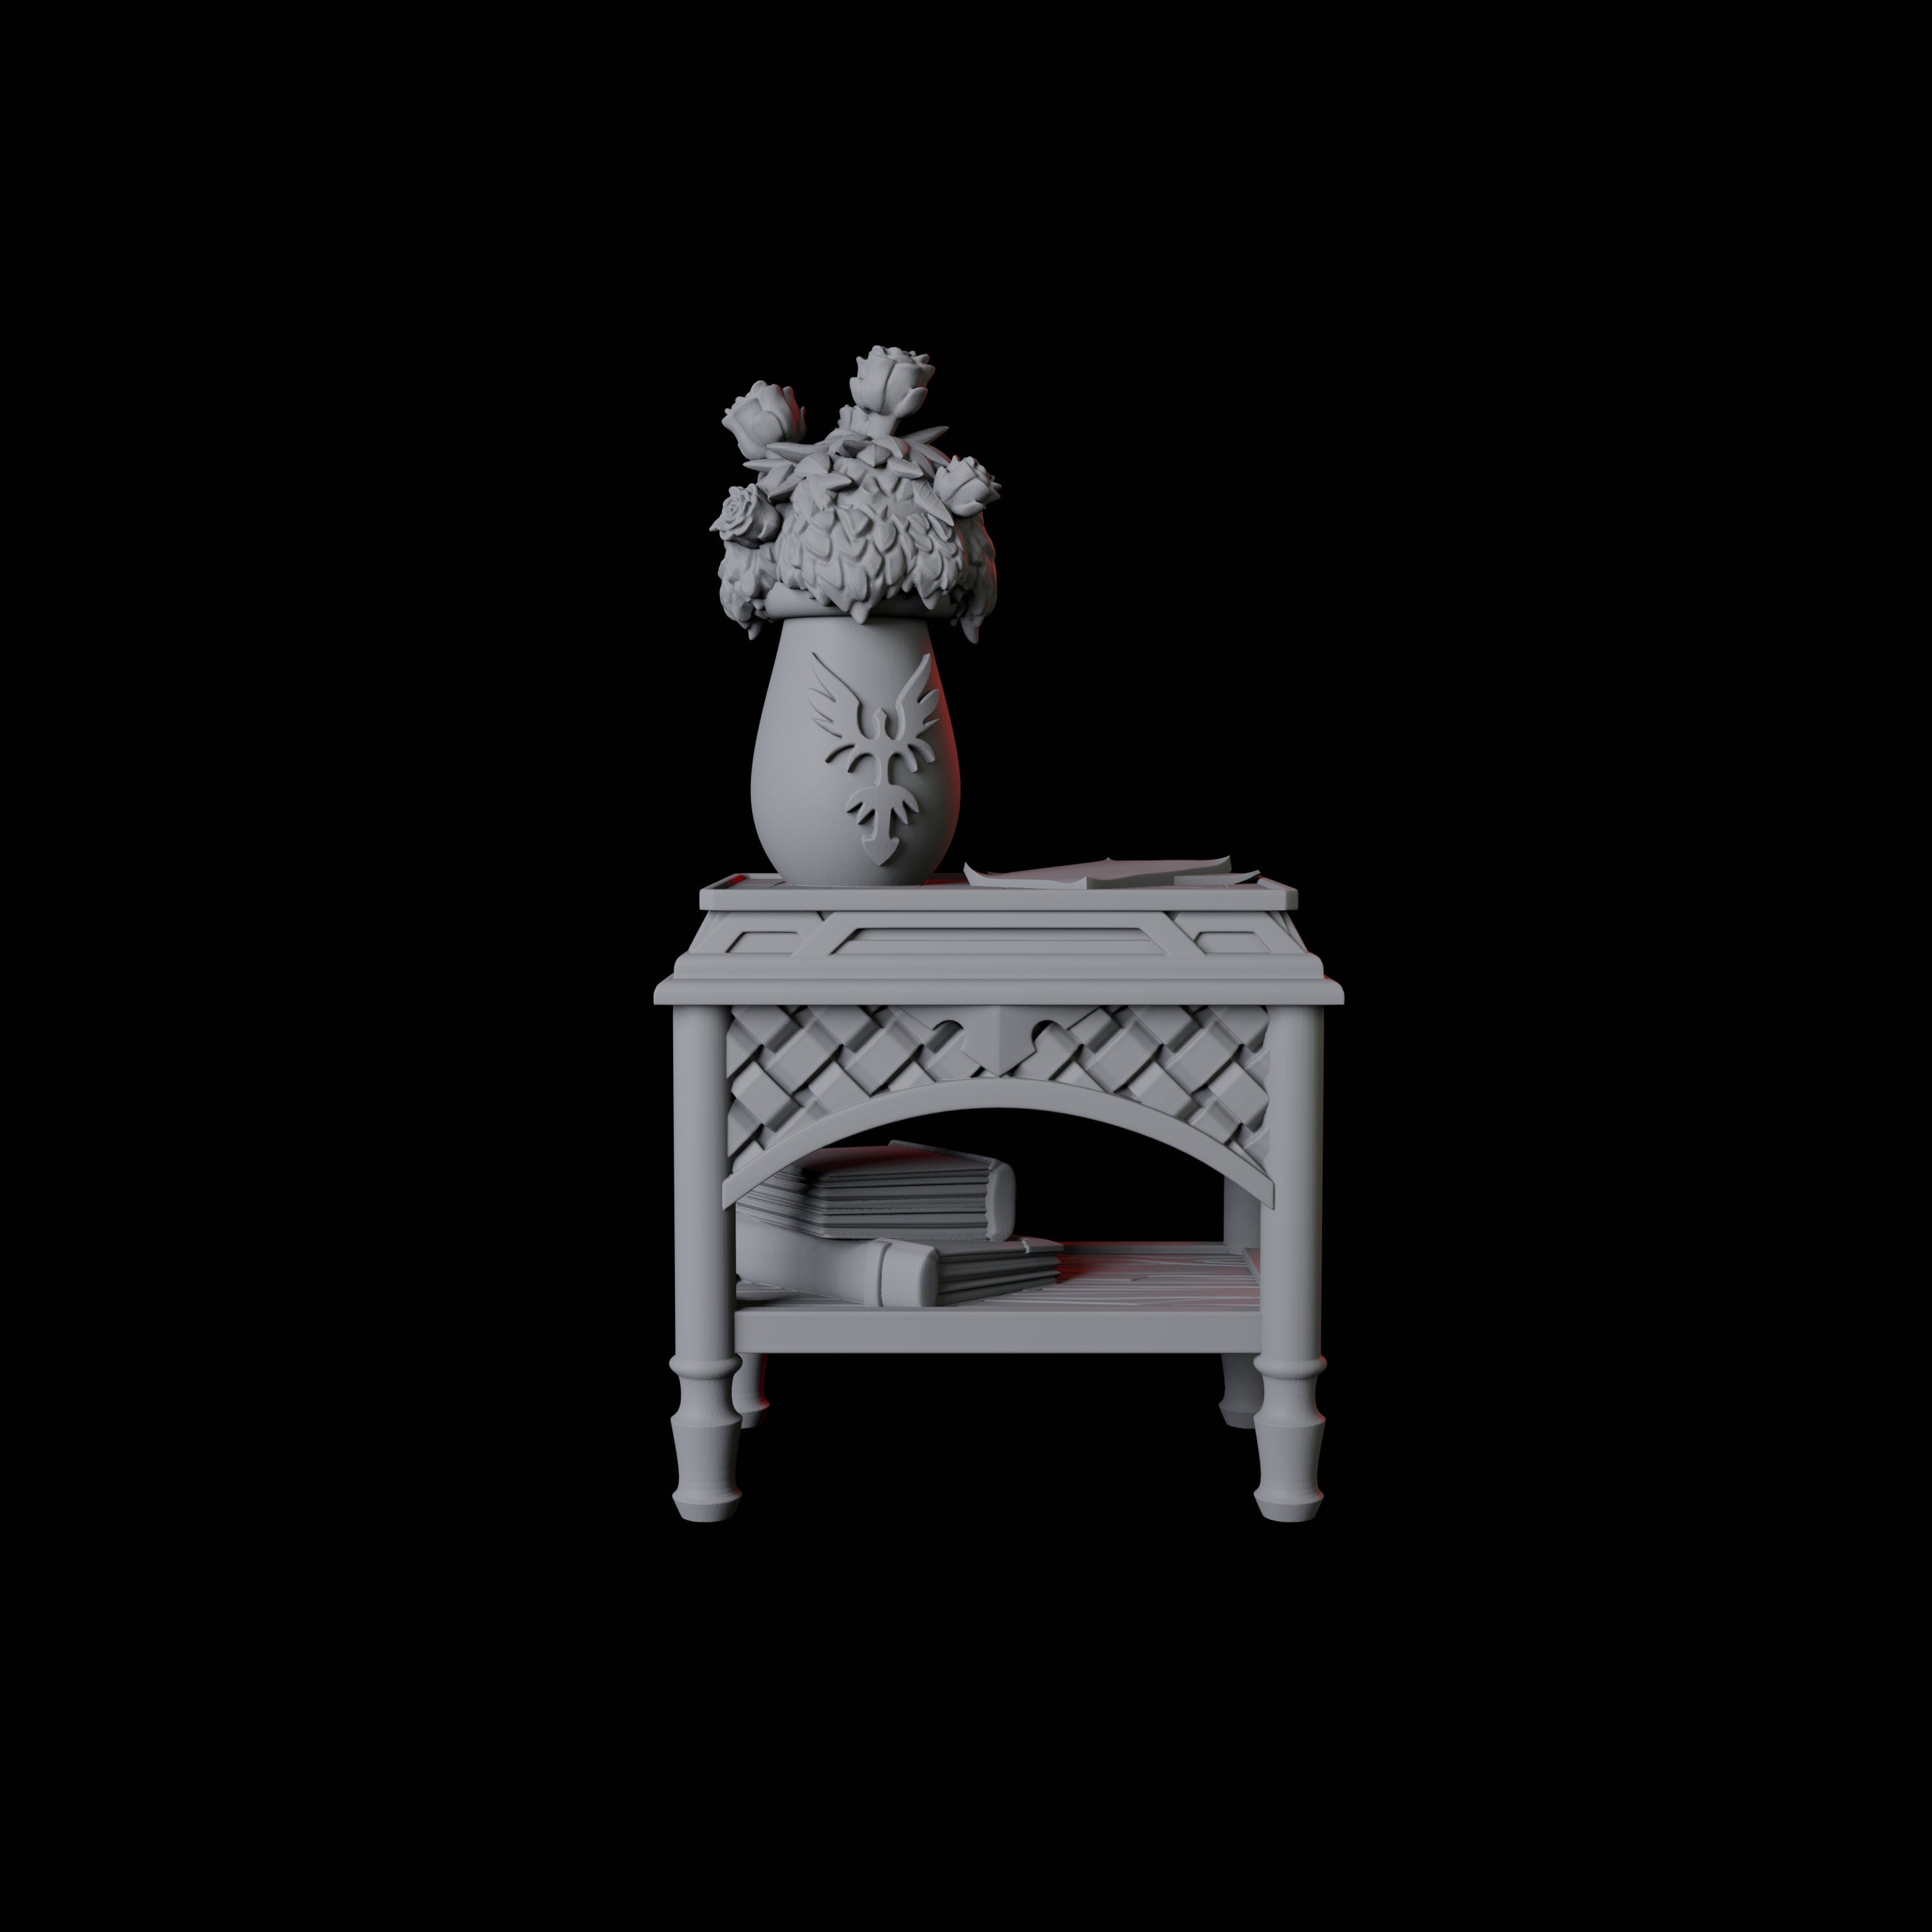 Castle Bedroom Furniture Miniature for Dungeons and Dragons, Pathfinder or other TTRPGs